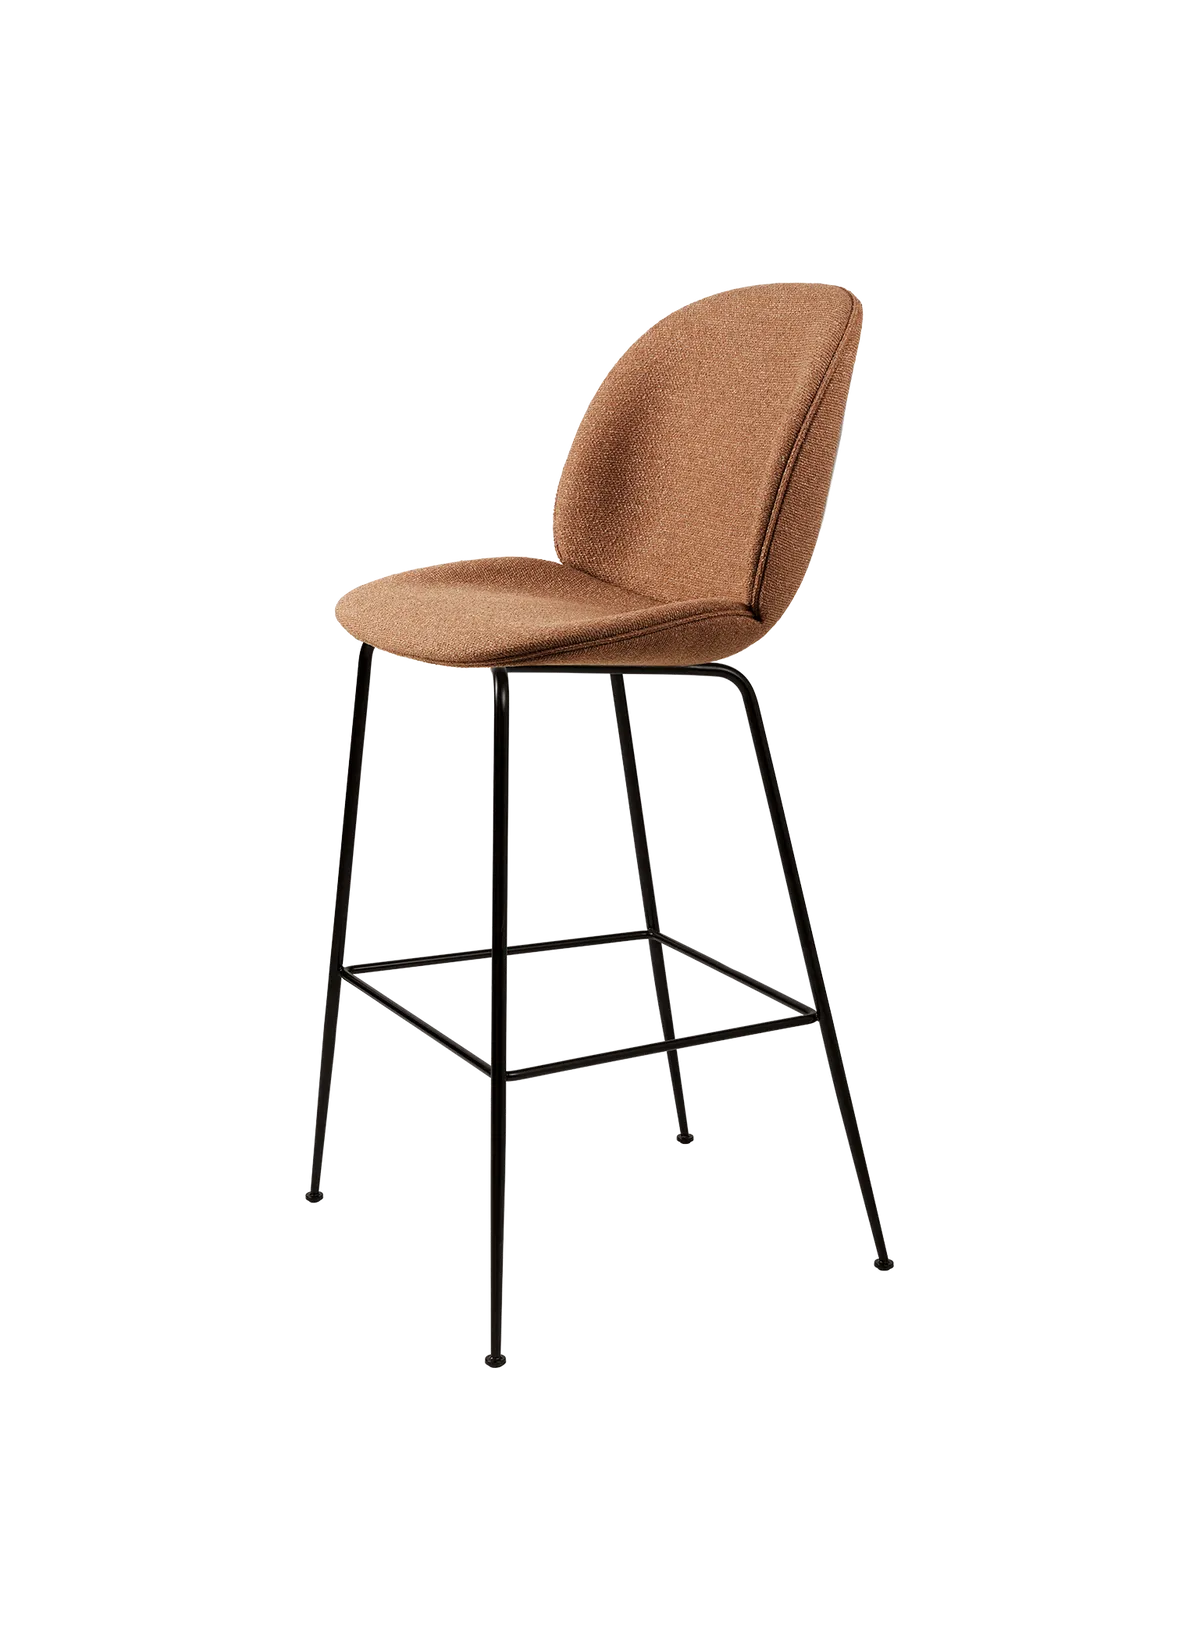 Beetle Bar Chair - Fully Upholstered - Conic Base by Gubi